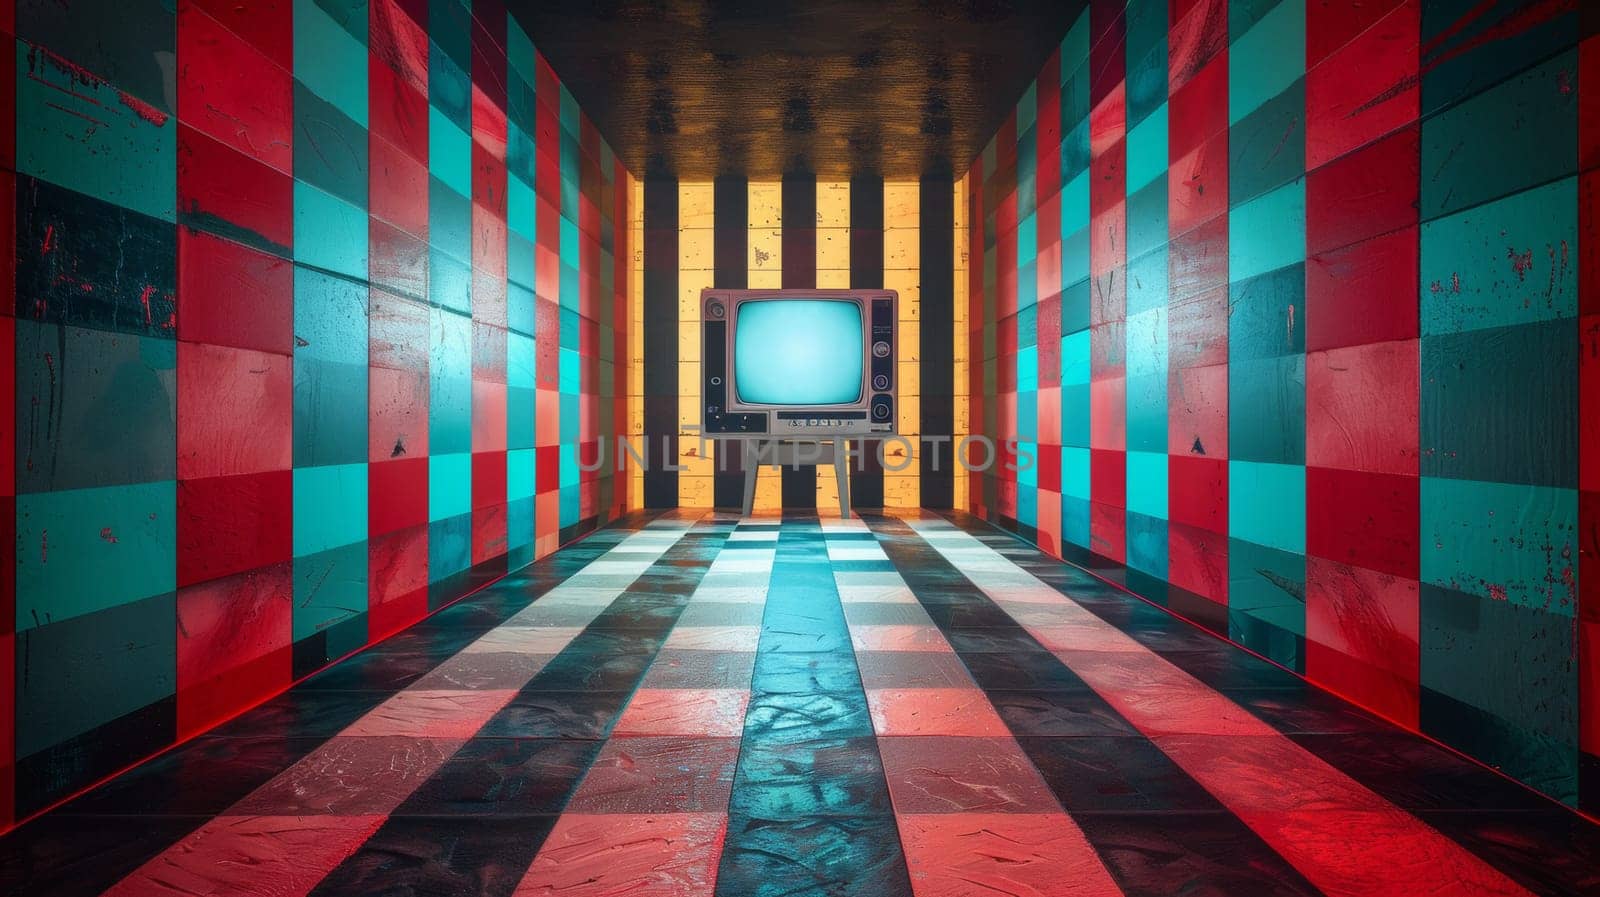 A hallway with a television on the wall and colorful checkered floor